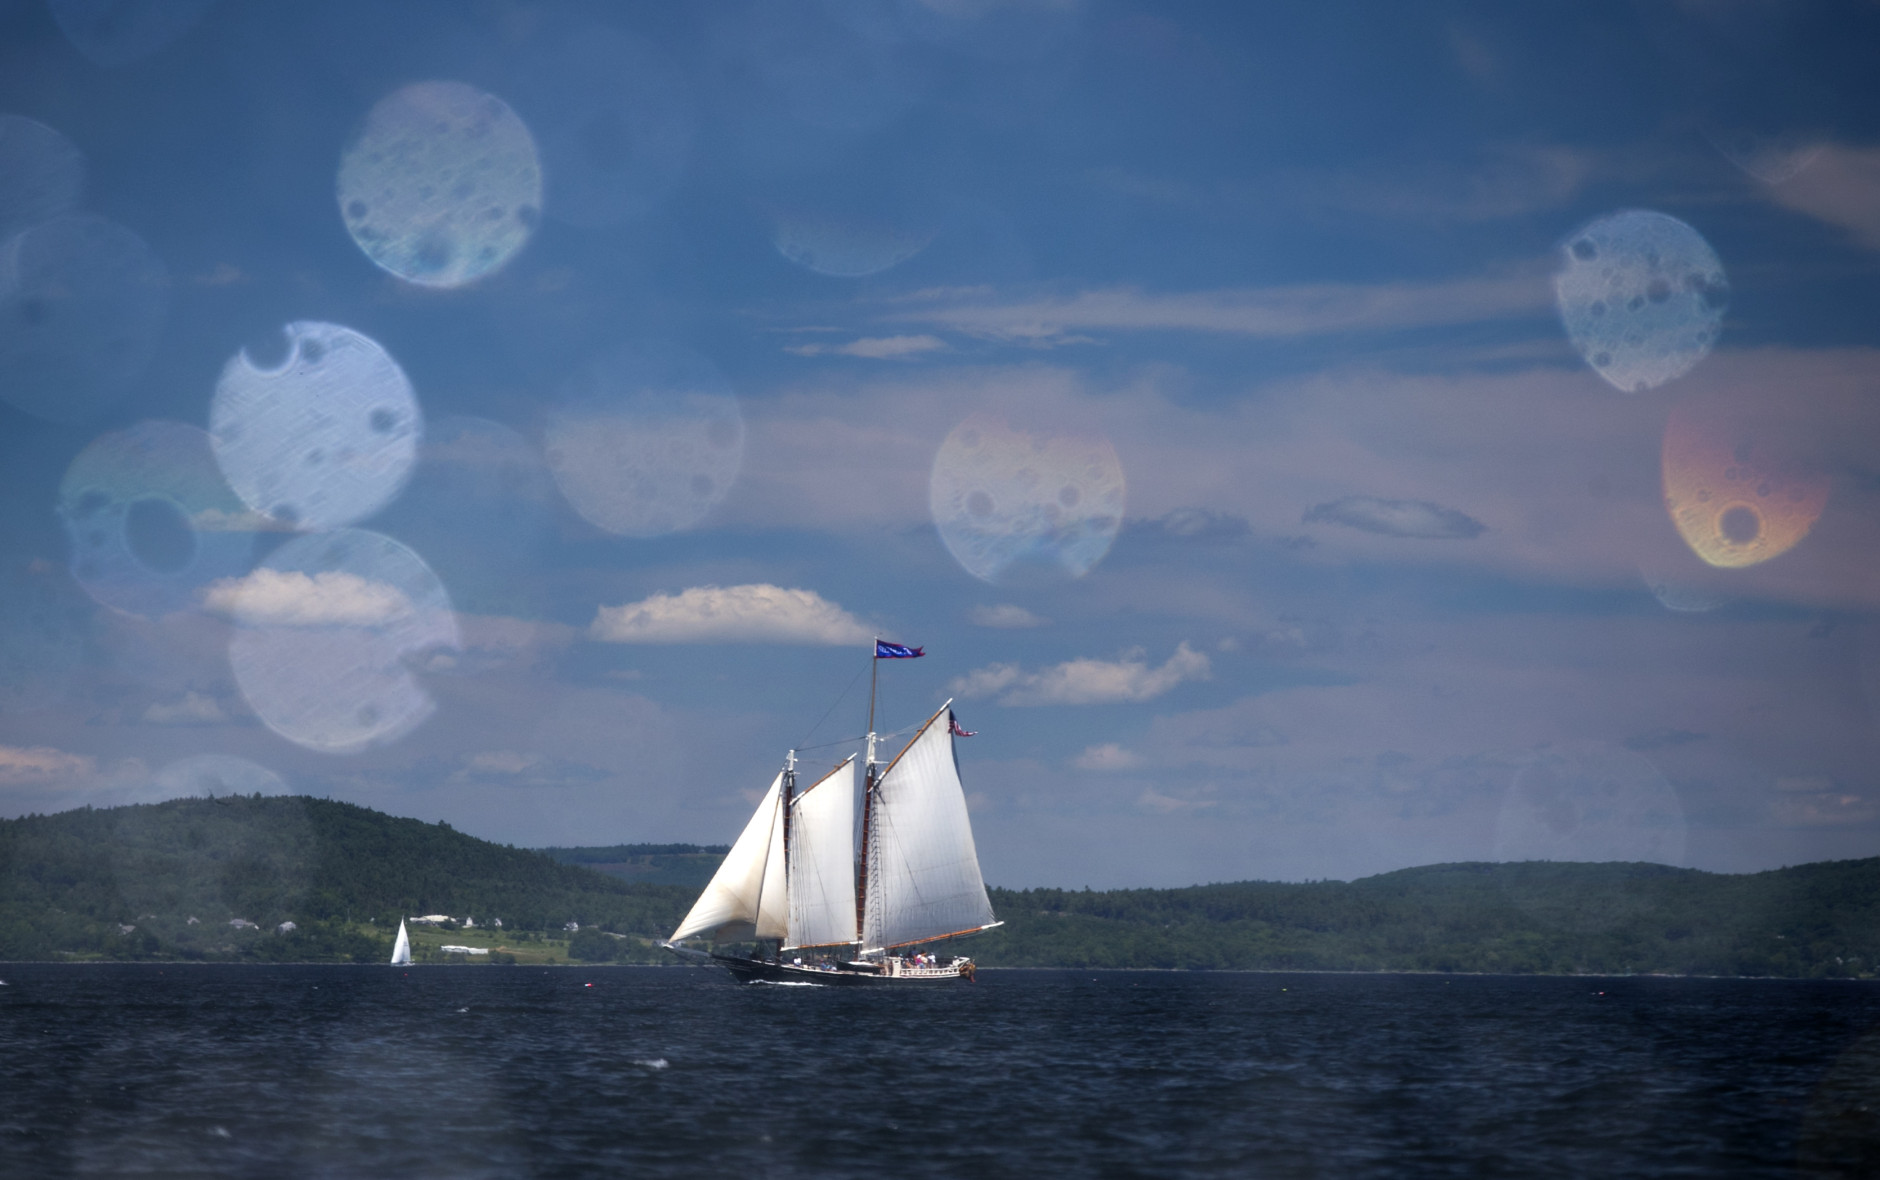 The Stephen Taber competes in the 39th Annual Great Schooner race, Friday, July 3, 2015, on Penobscot Bay off the coast of Rockland, Maine. The history of racing coasting schooners started over a century ago with sailors trying to beat their competitors to market, according to the Maine Windjammmer's Association. The first boat back to port always got the best price for their cargo, whether it be fish, granite or Christmas trees. (AP Photo/Robert F. Bukaty)